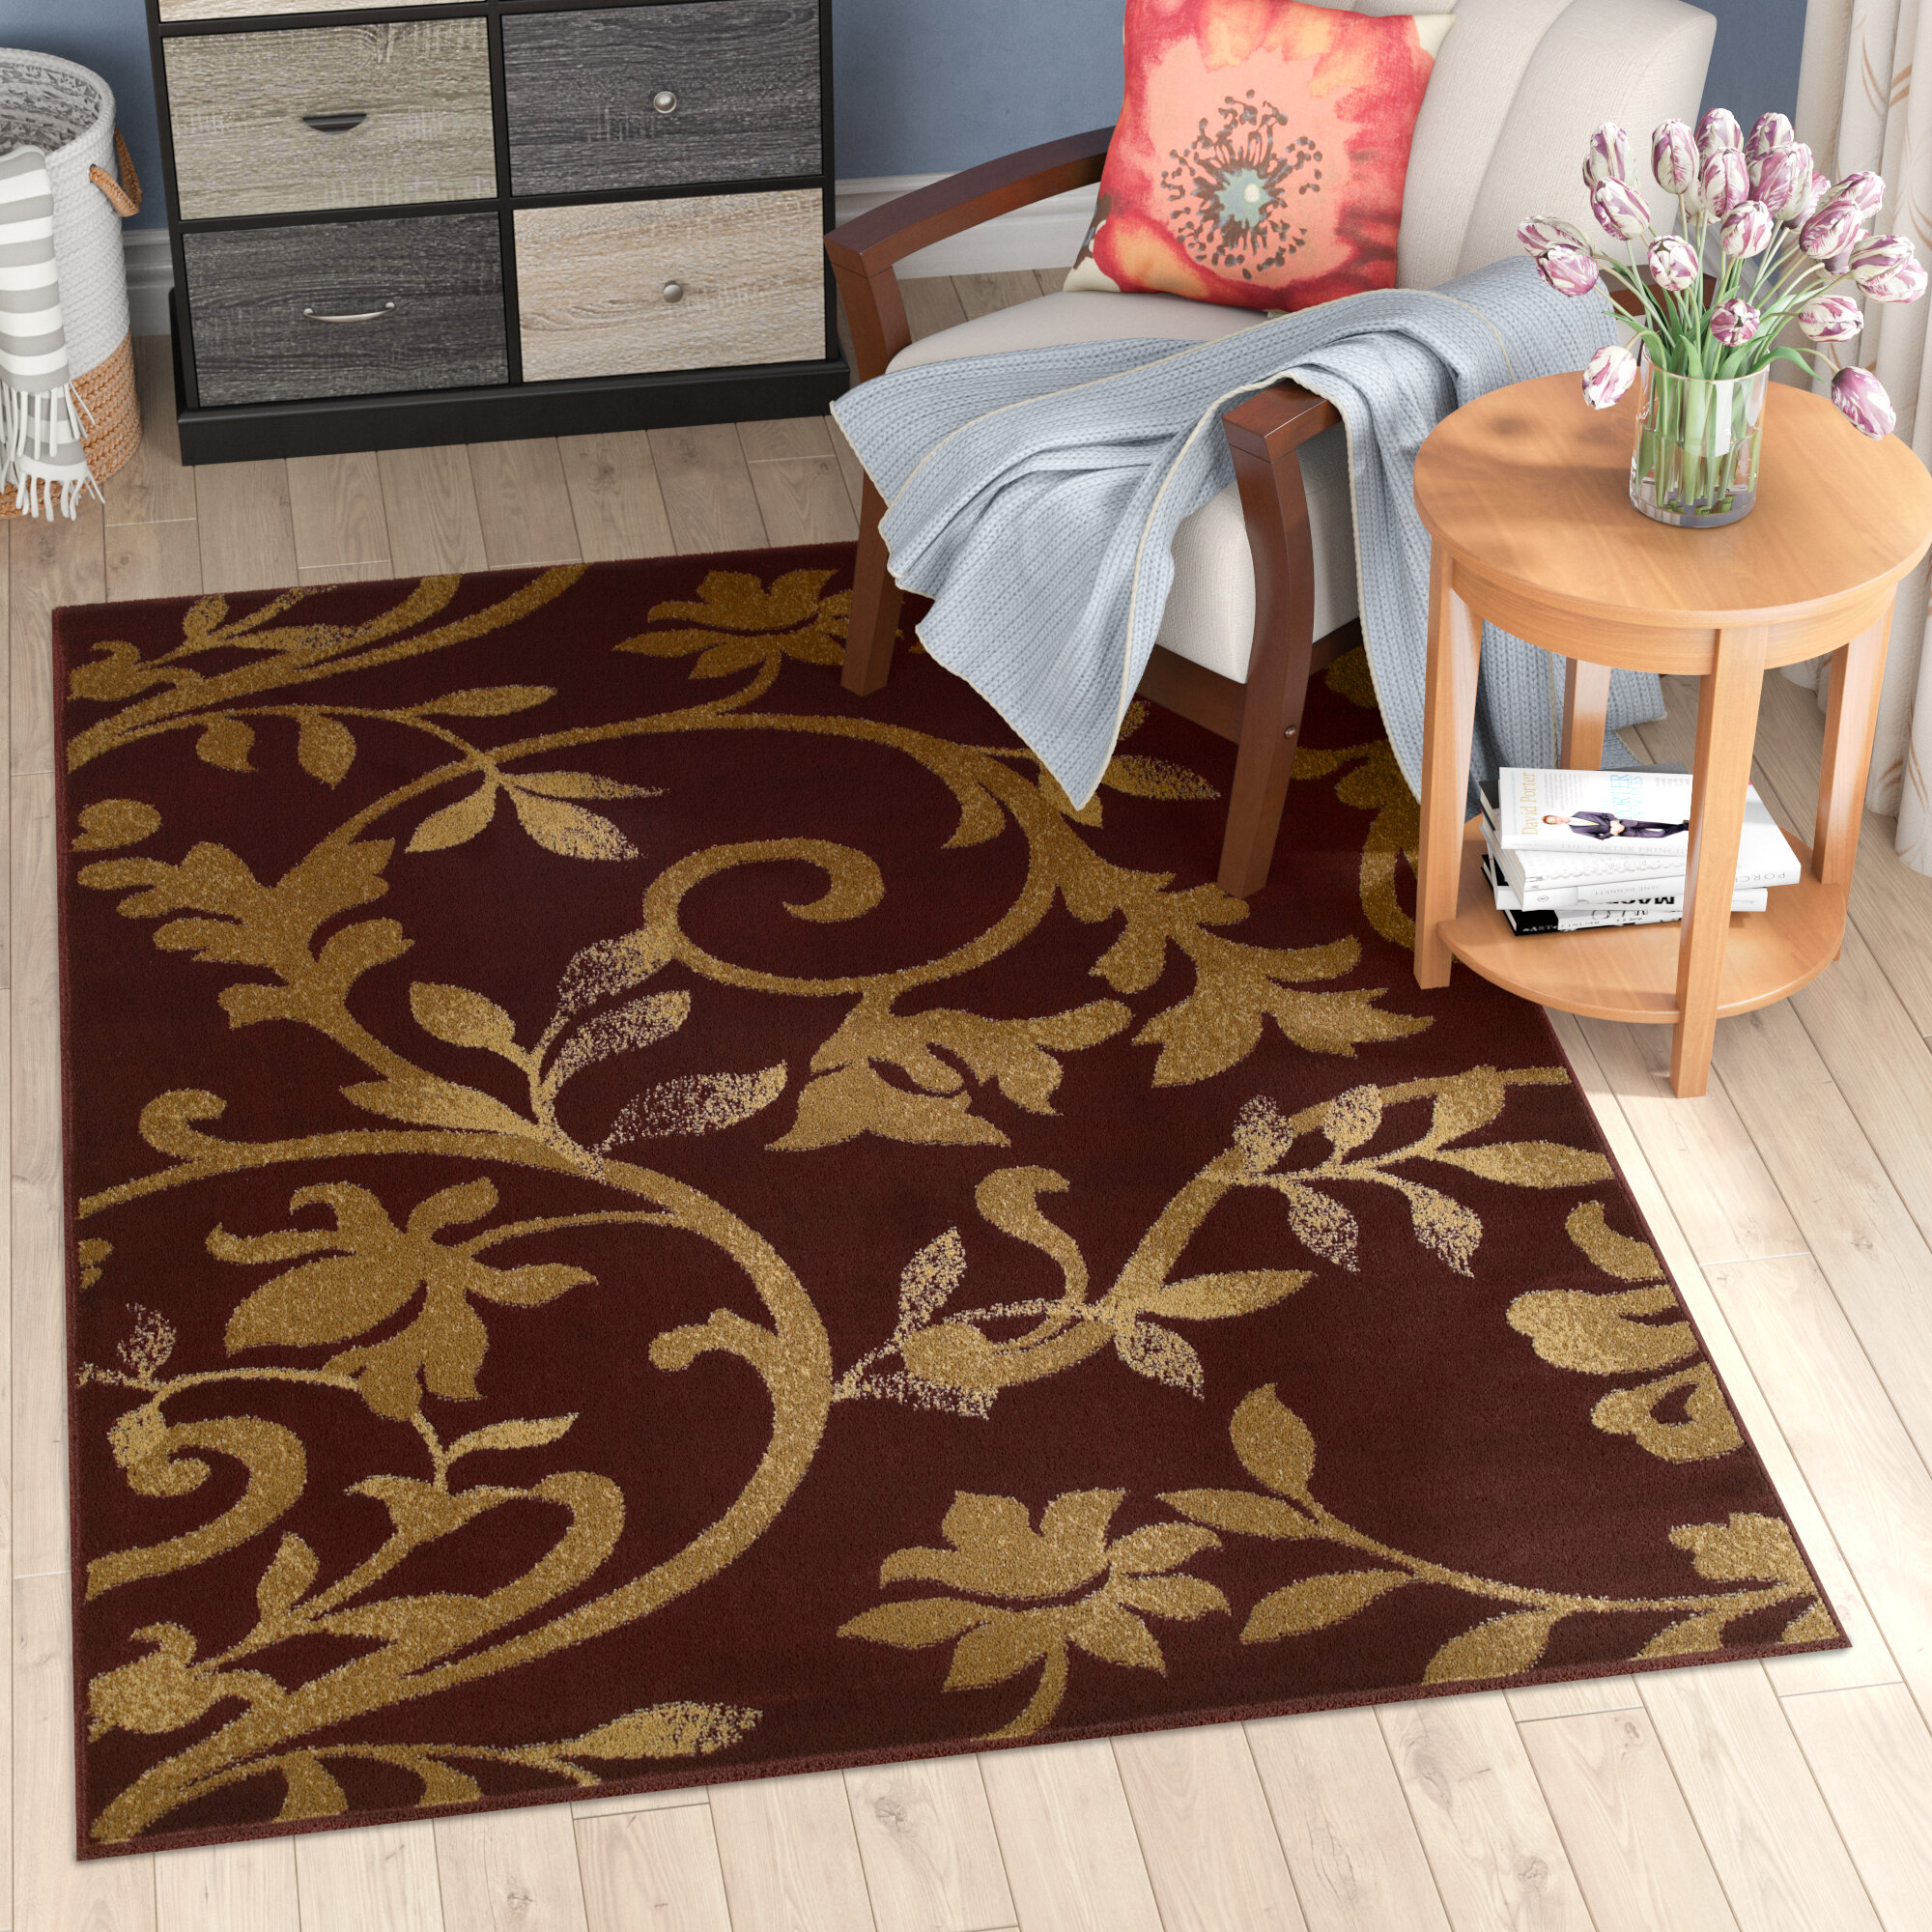 Brumlow Mills Caitlin Simple Home Indoor Floral Print Pattern Area Rug Perfect for Any Living Room Decor Kitchen or Entryway Rug Green 7'6 x 10' Bedroom Carpet Dining Room 